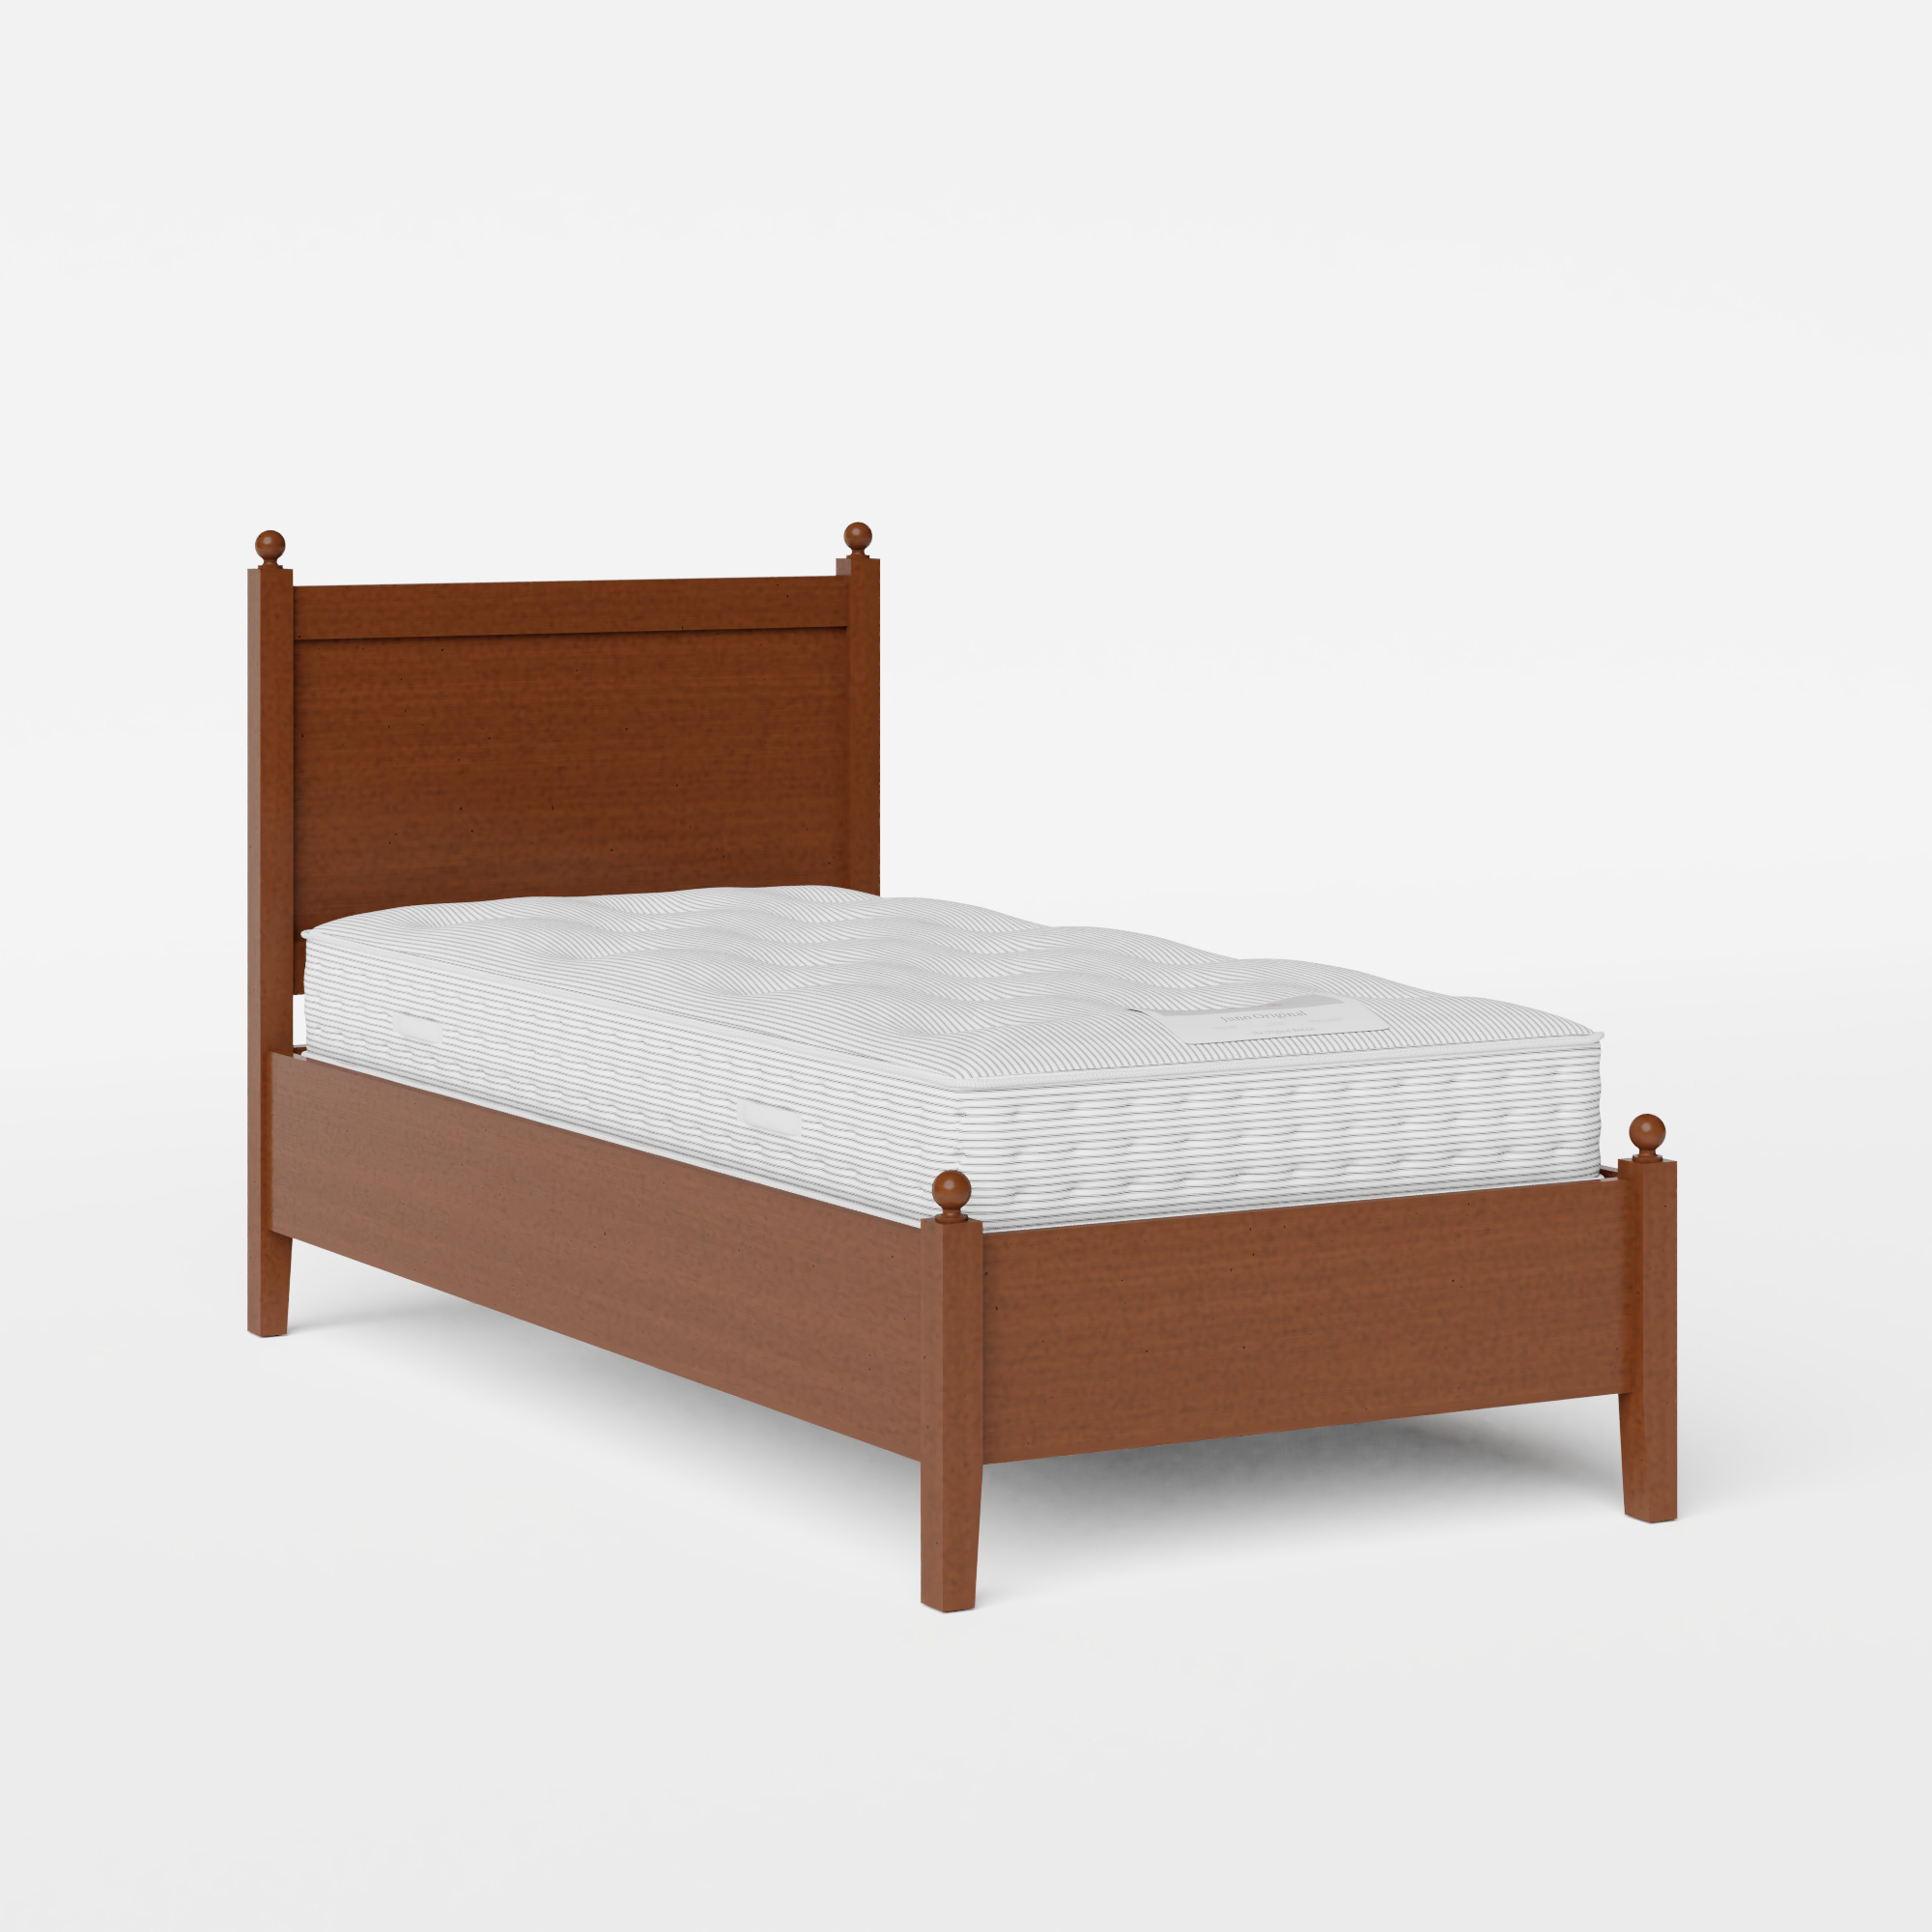 Marbella Low Footend single wood bed in dark cherry with Juno mattress